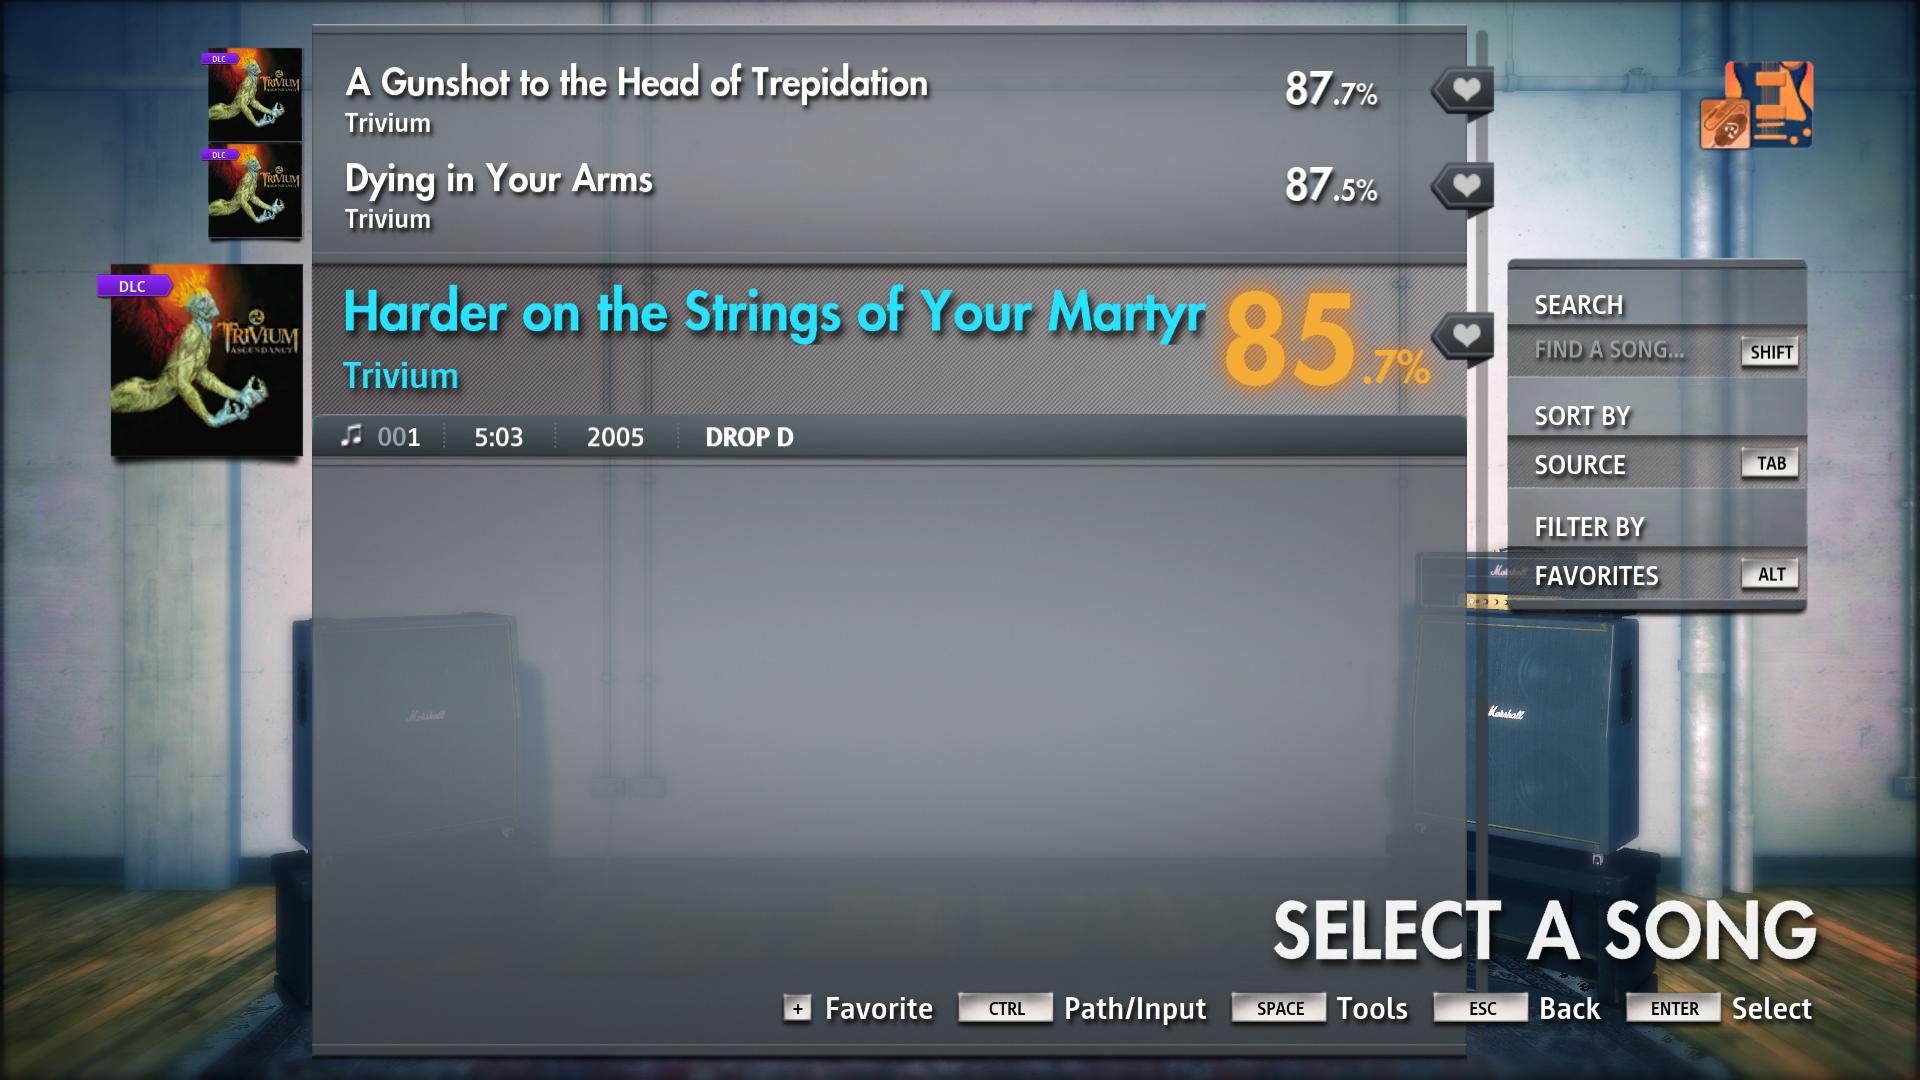 Rocksmith® 2014 Edition – Remastered – Trivium - “Pull Harder on the Strings of Your Martyr” Featured Screenshot #1